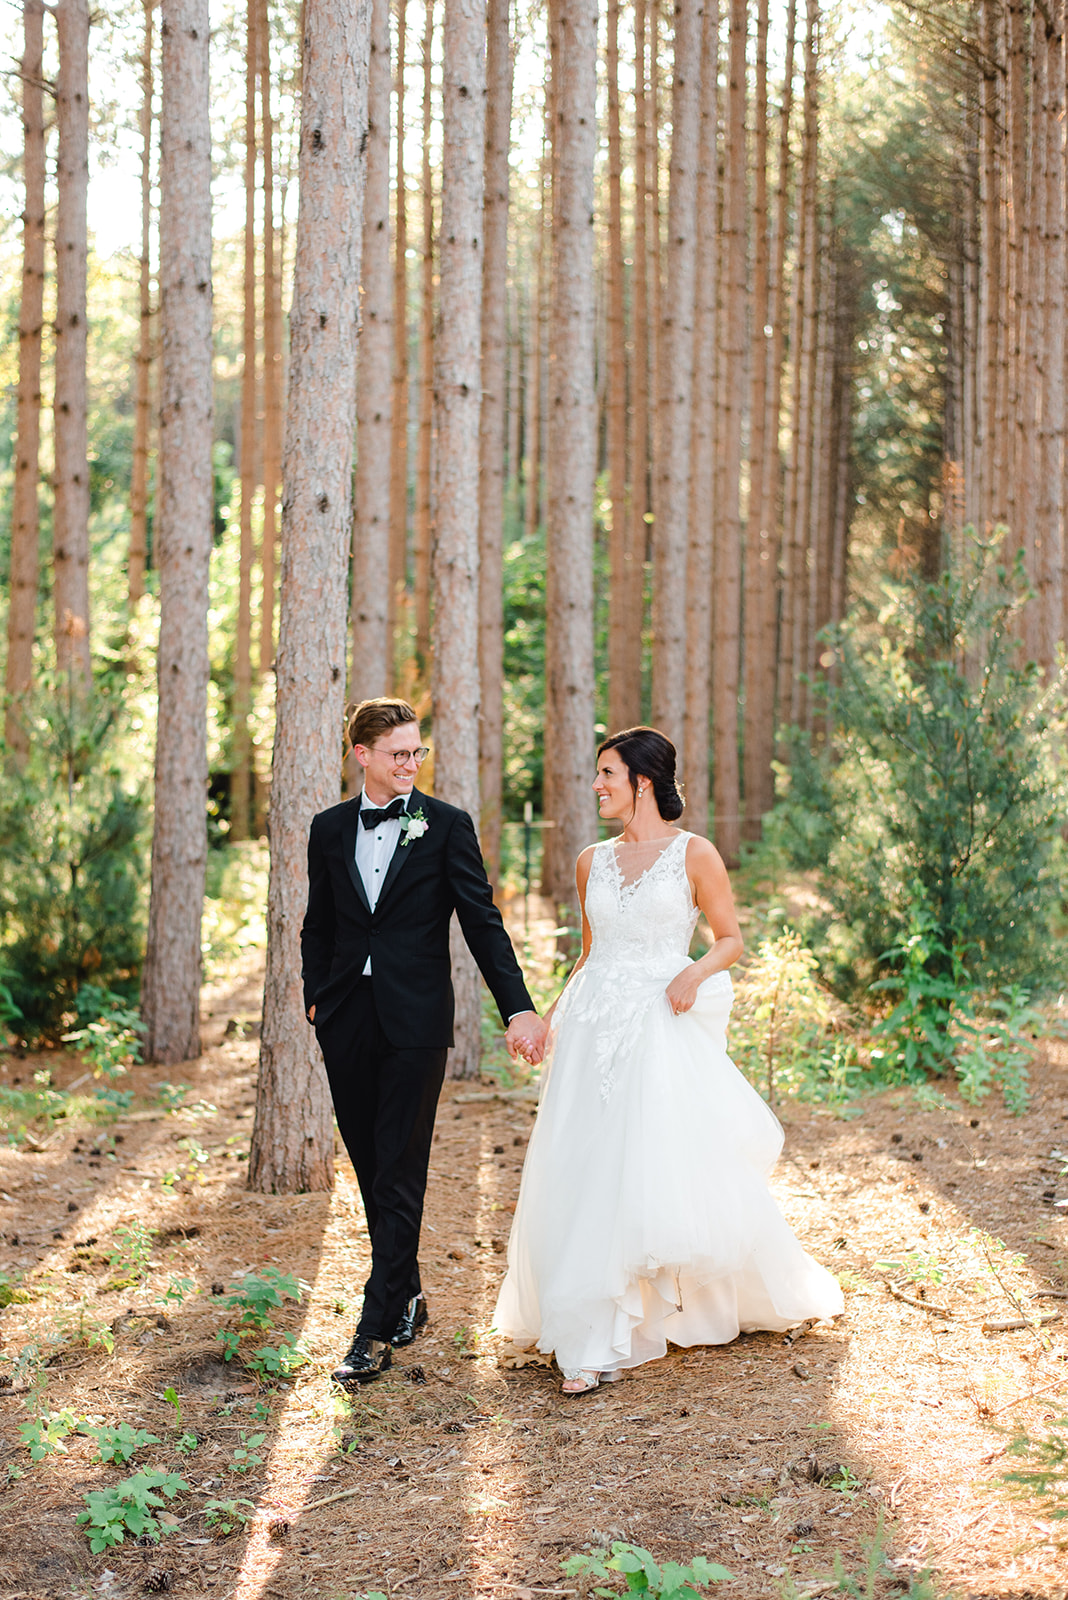 Newlyweds walk through a pine tree farm holding hands in a lace dress and black suit at a Unique Wedding Venues Minnesota